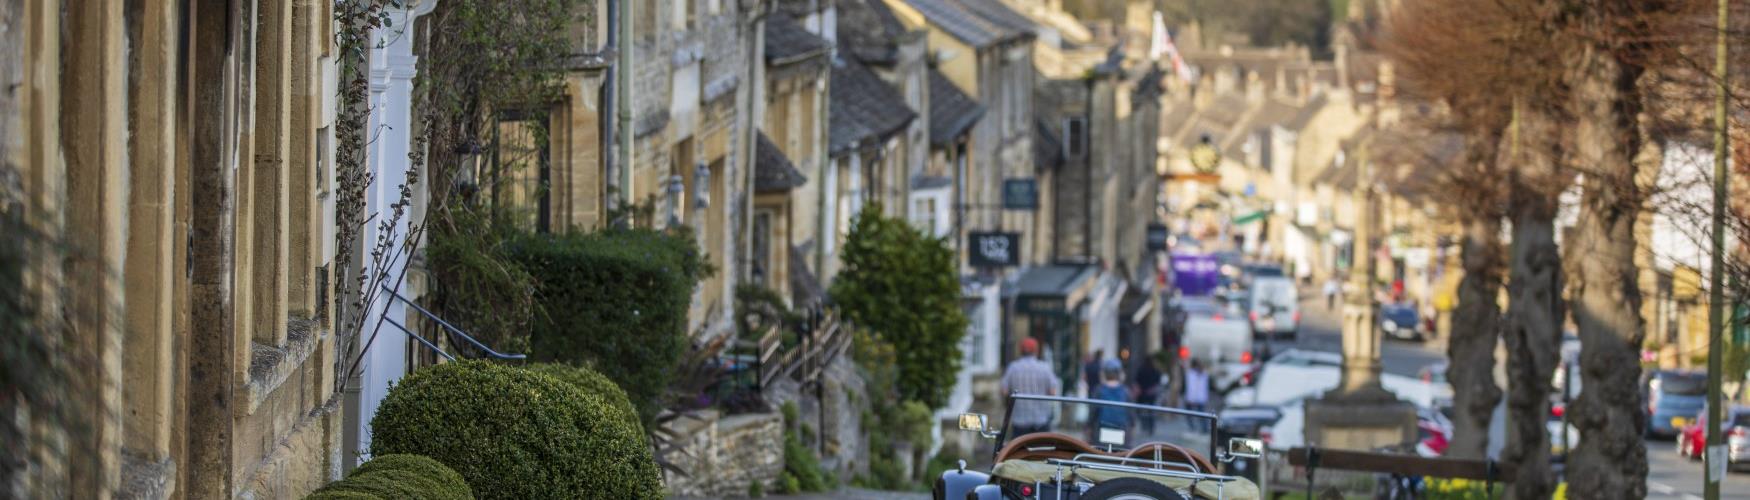 A classic car parked with Burford High Street in the distance